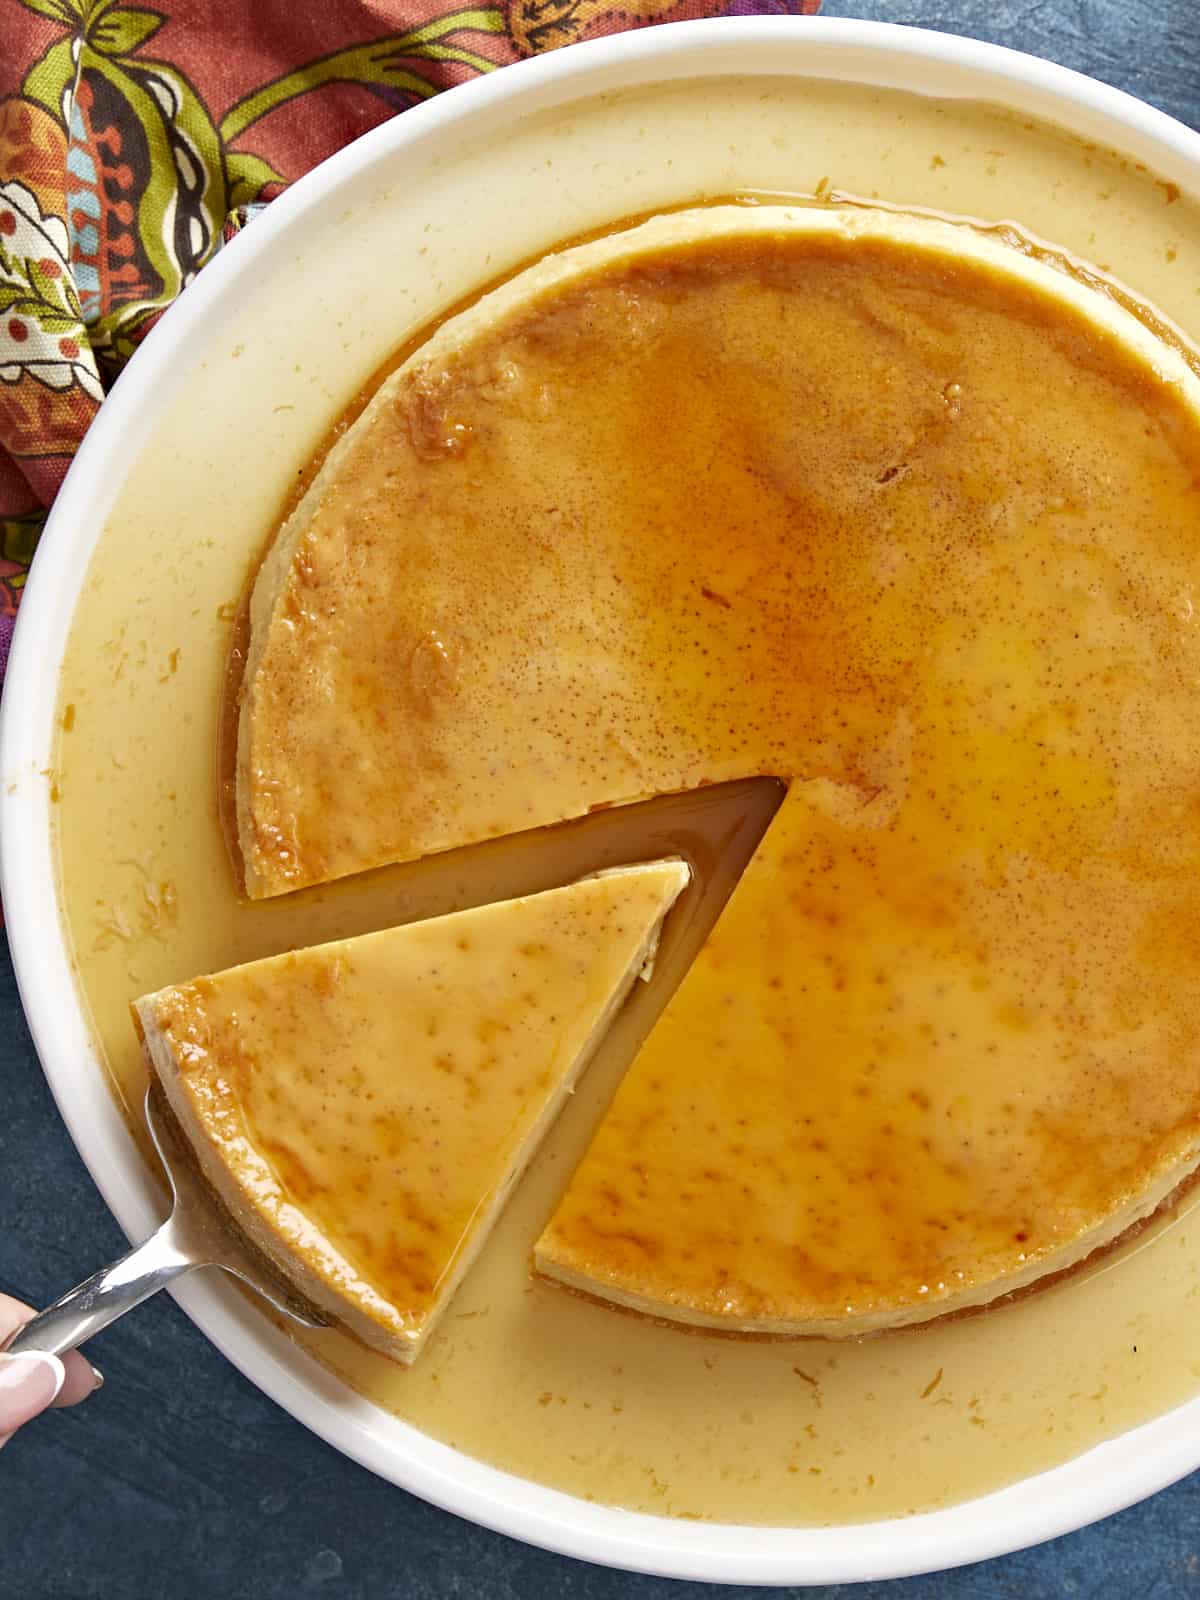 Overhead view of flan with one slice being lifted out.